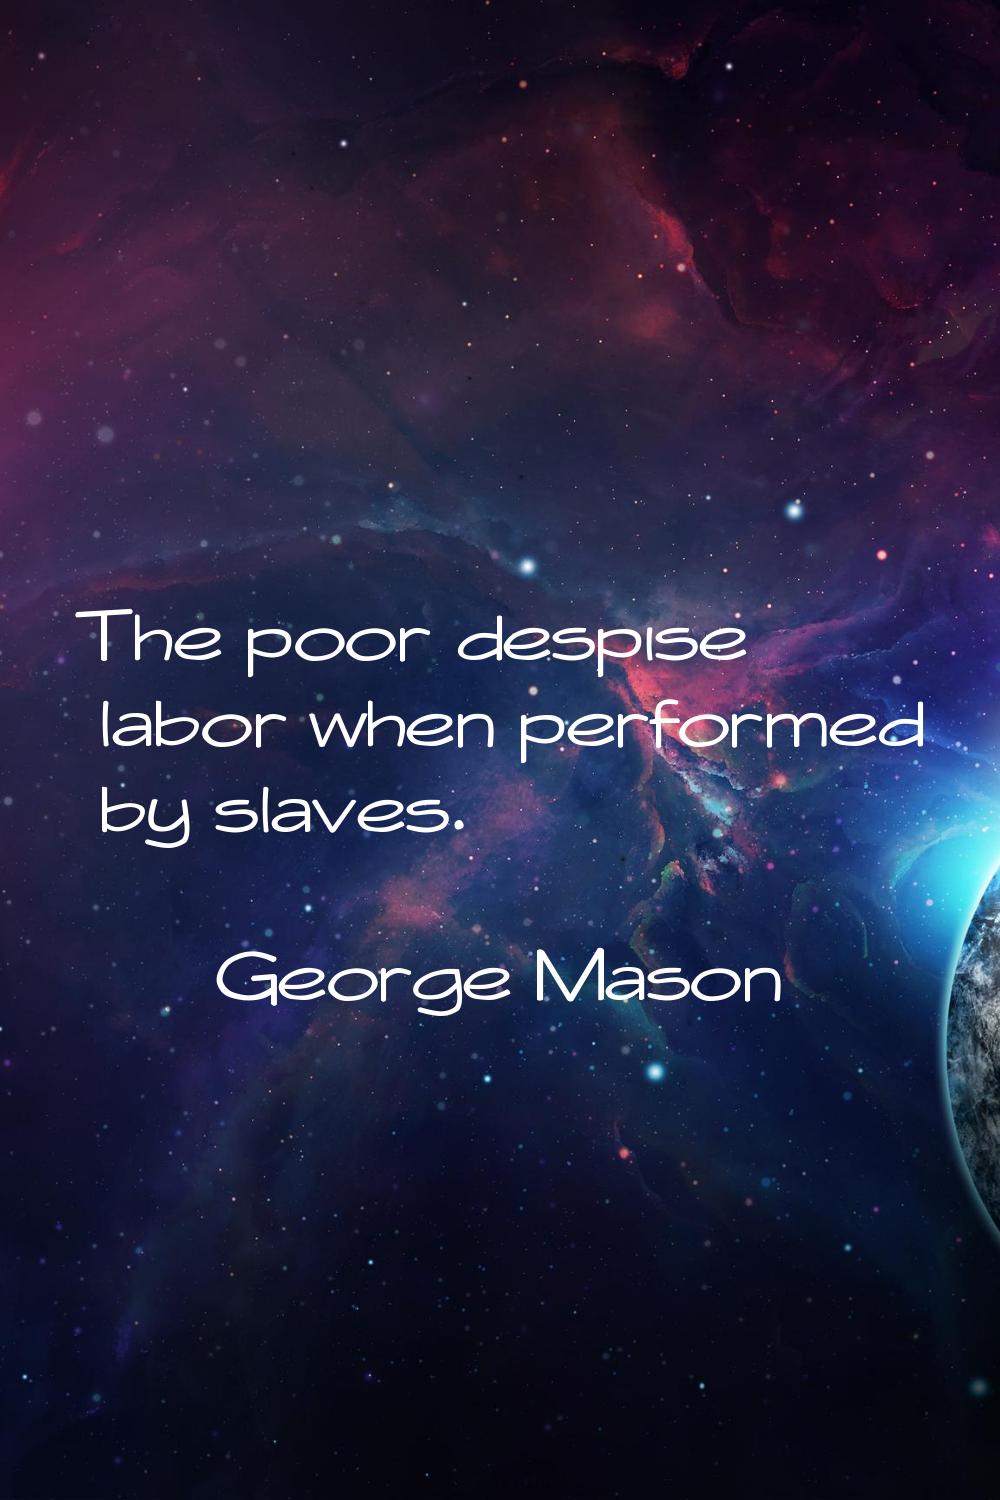 The poor despise labor when performed by slaves.